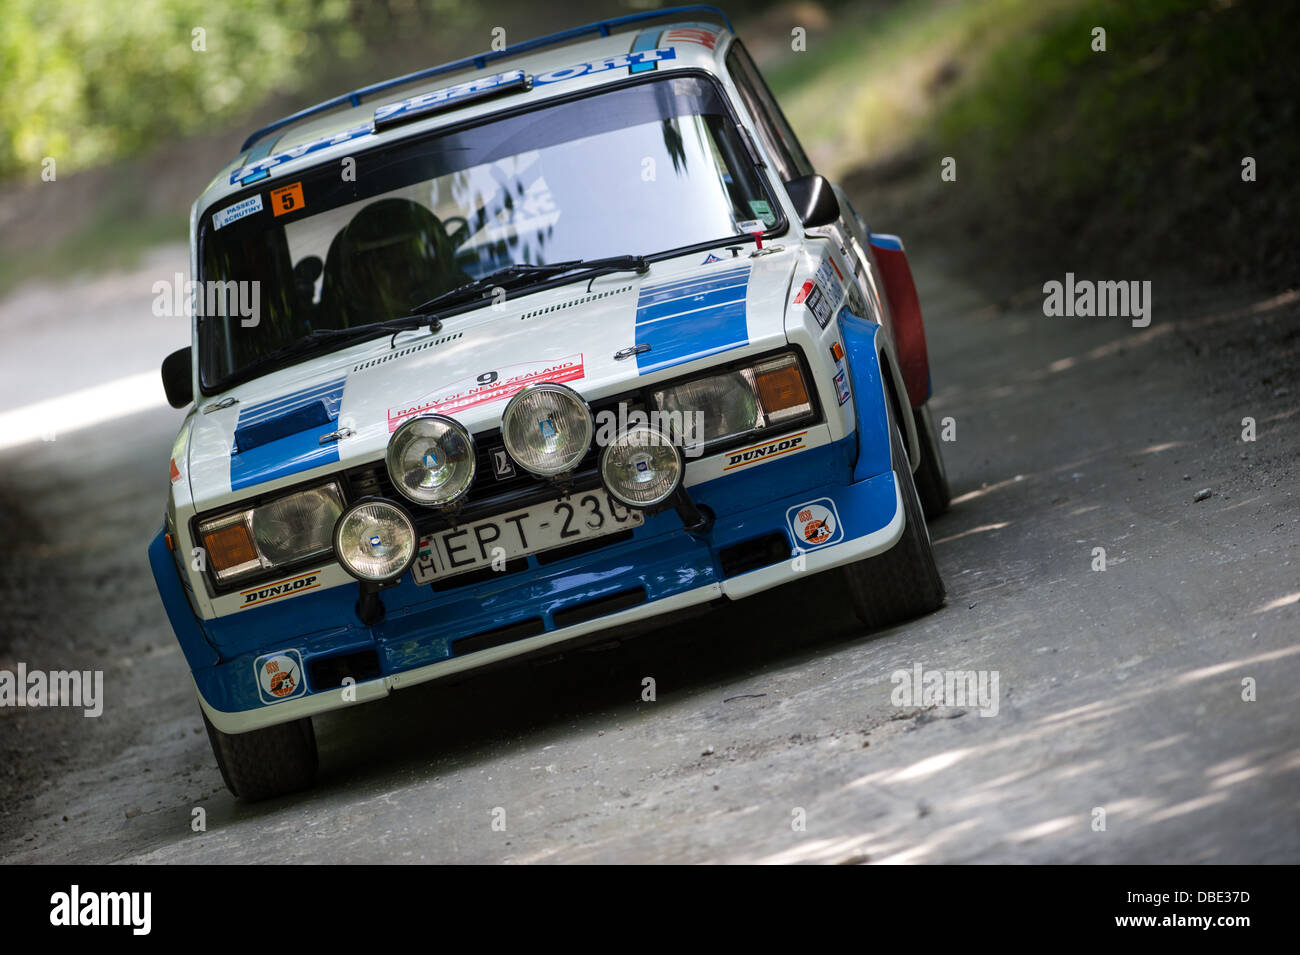 Chichester, UK - July 2013: Lada VFTS in action on the rally stage at the Goodwood Festival of Speed on July 14, 2013. Stock Photo